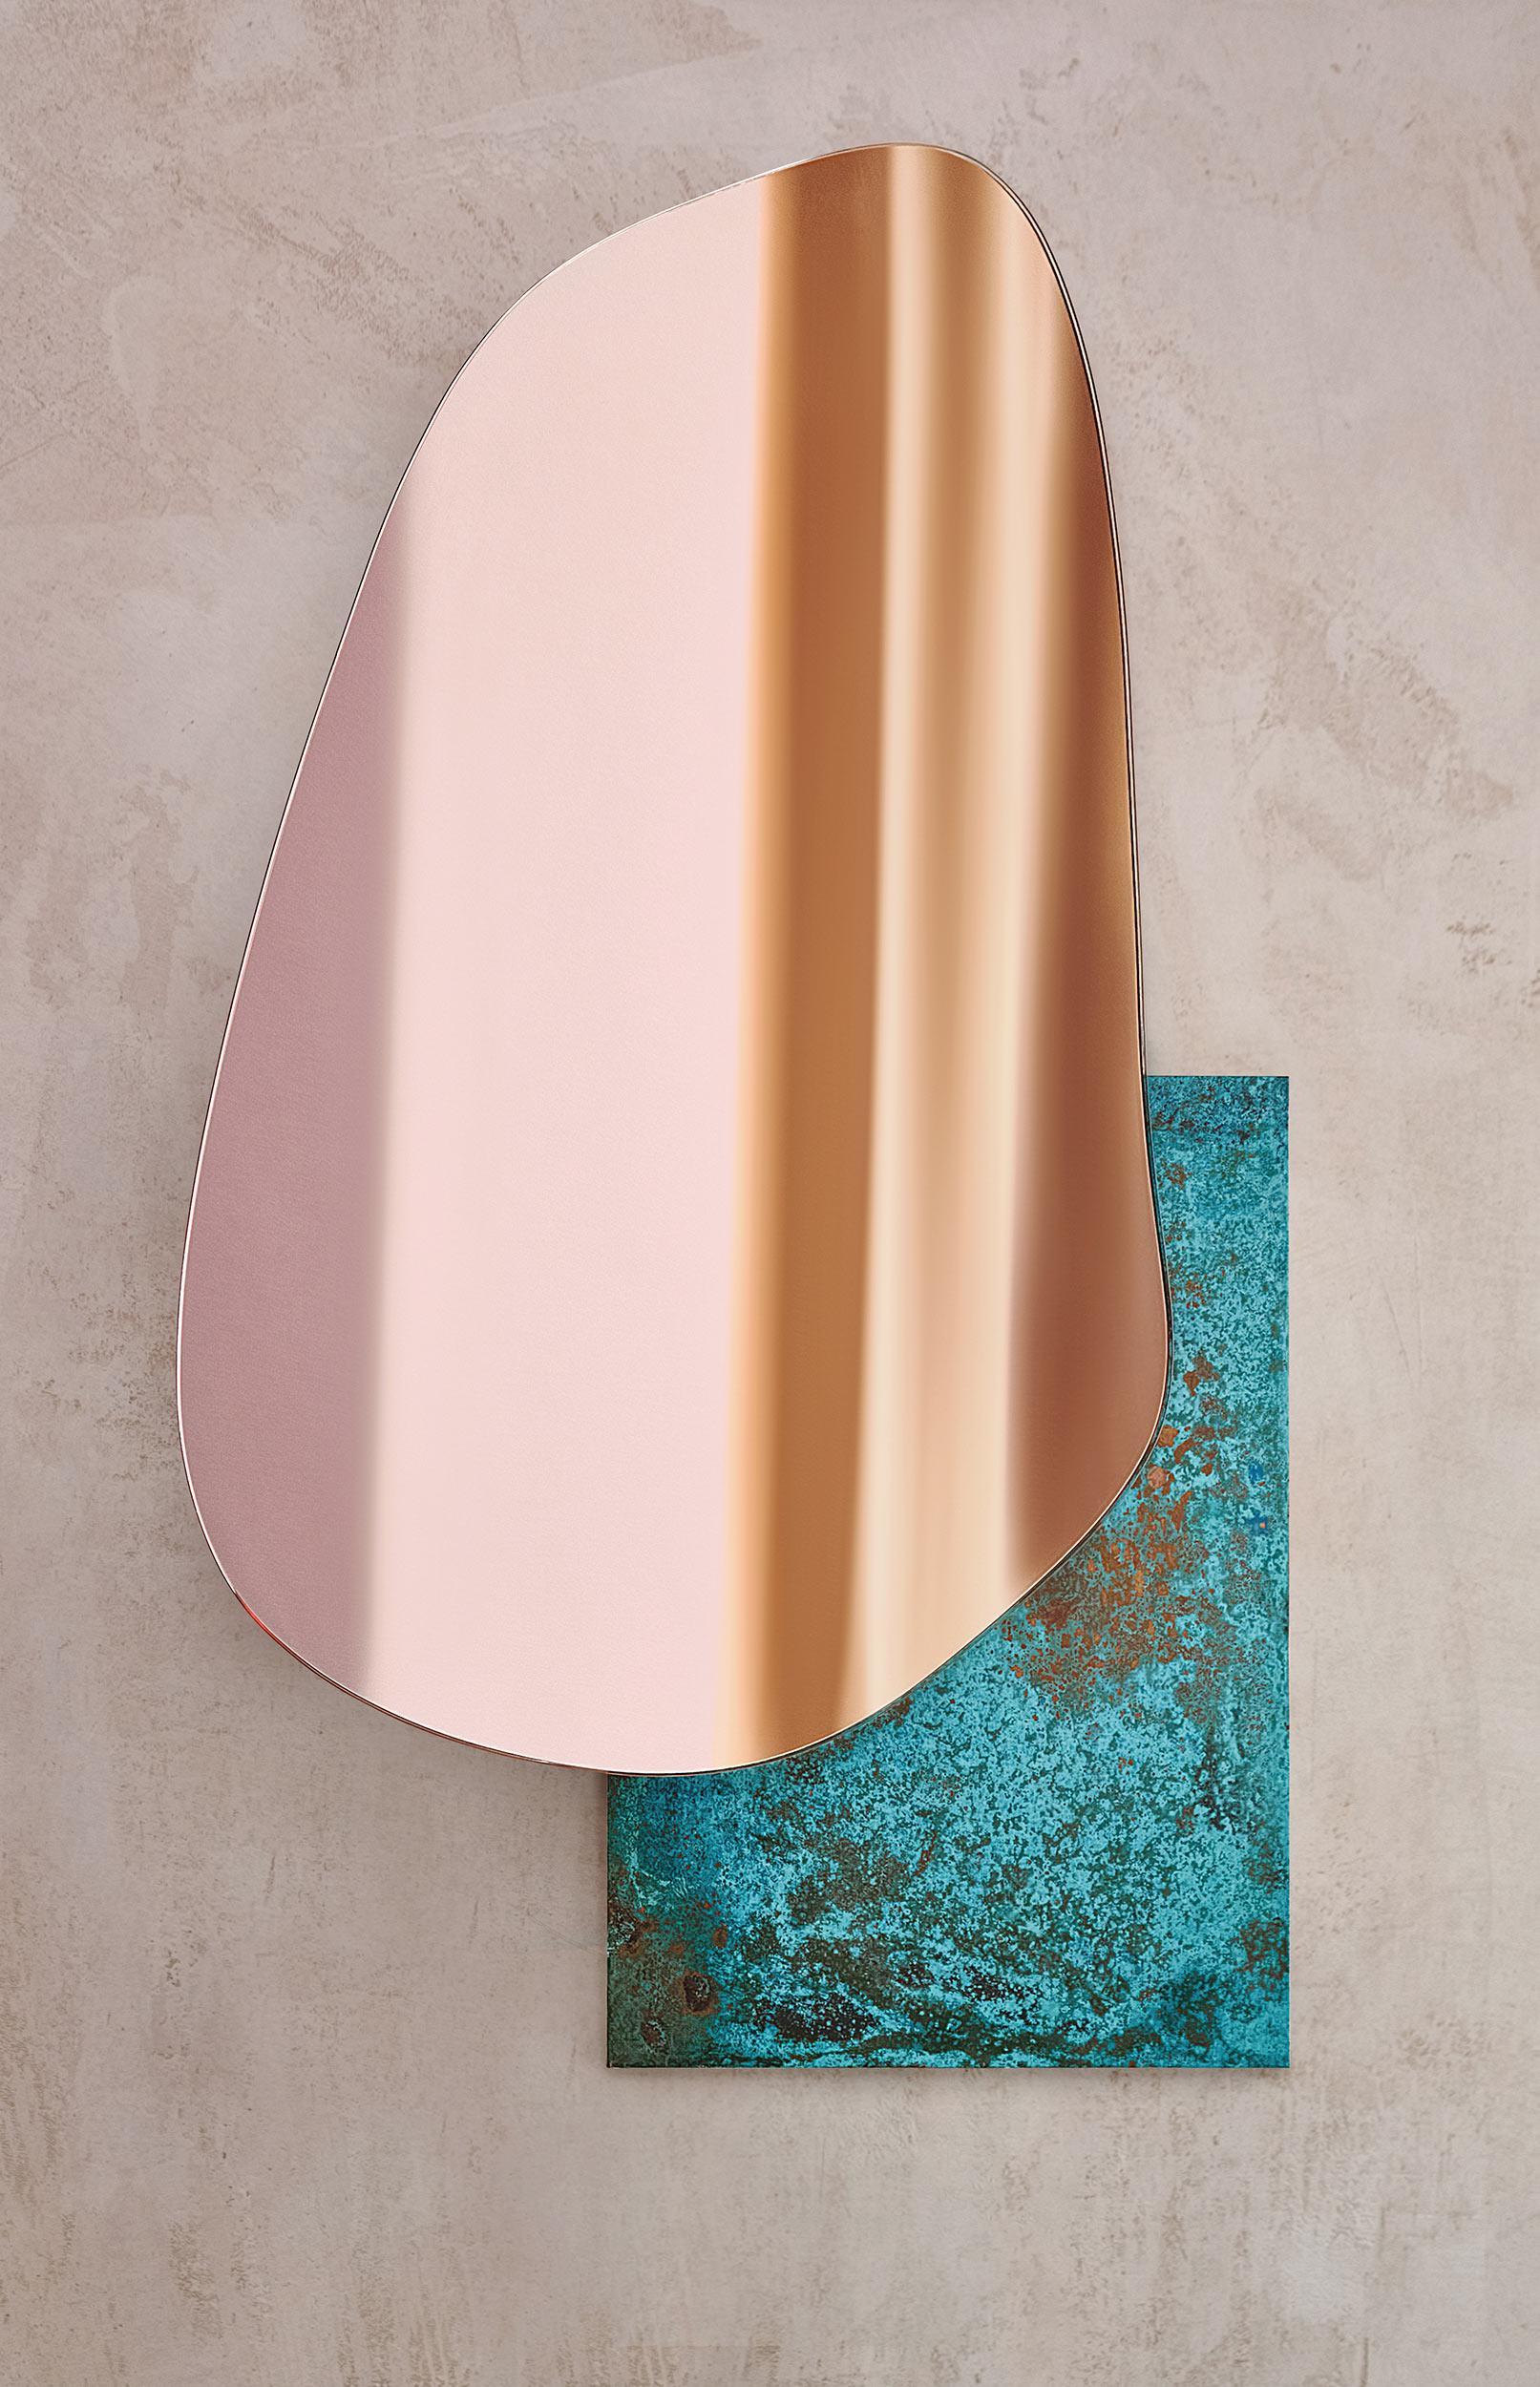 Brushed Contemporary Wall Mirror 'Lake 3' by Noom, White Marble and Copper Tint For Sale